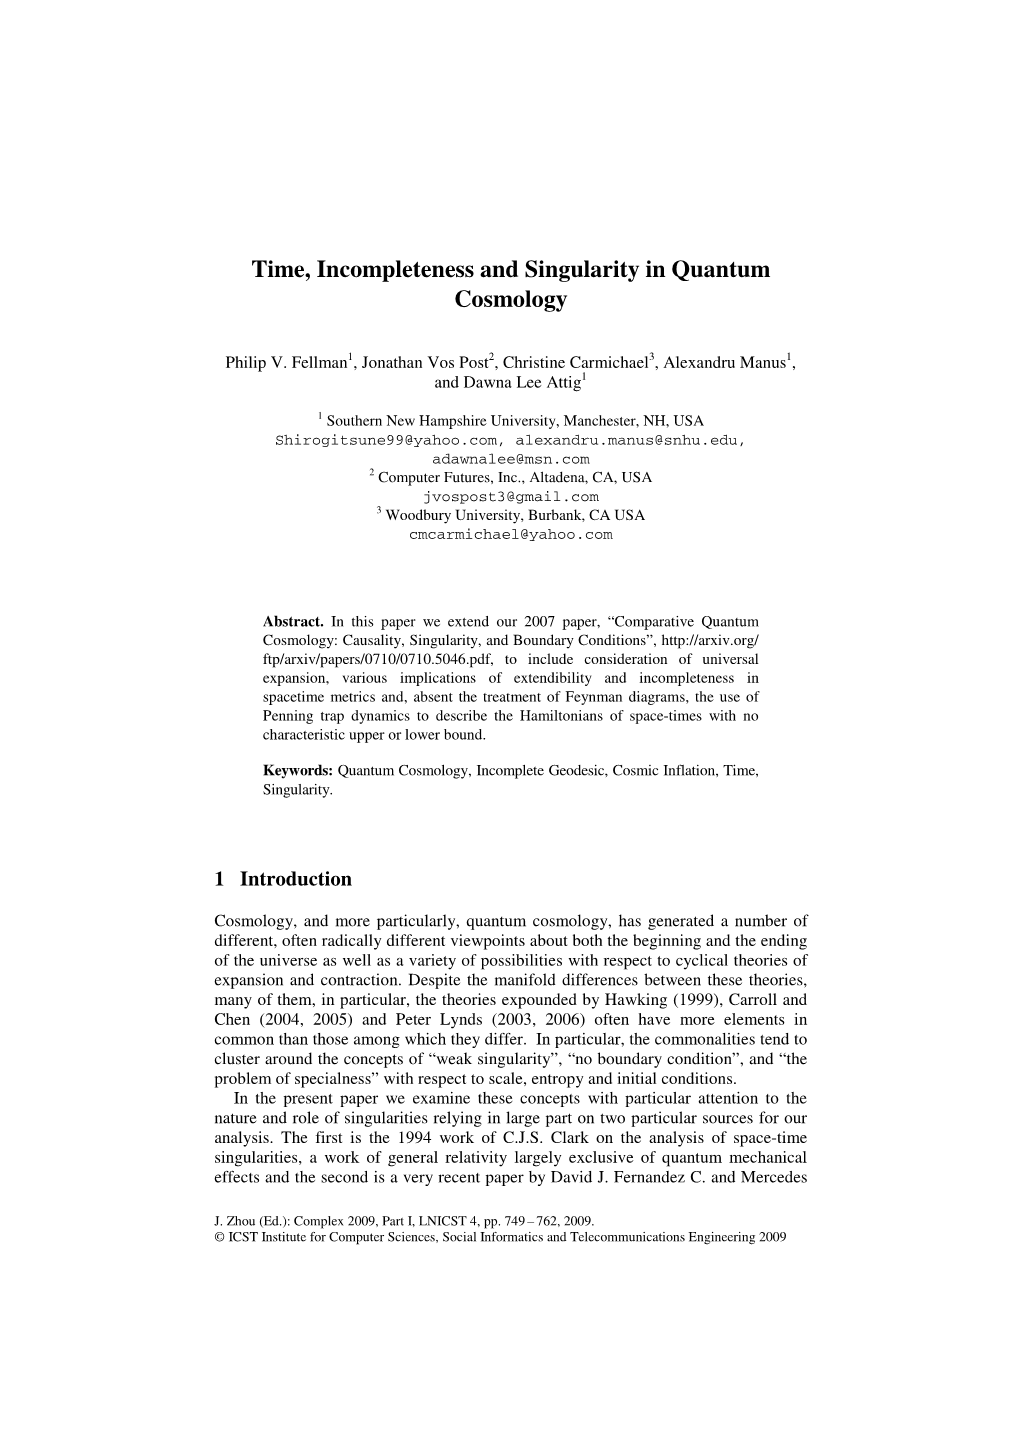 Time, Incompleteness and Singularity in Quantum Cosmology